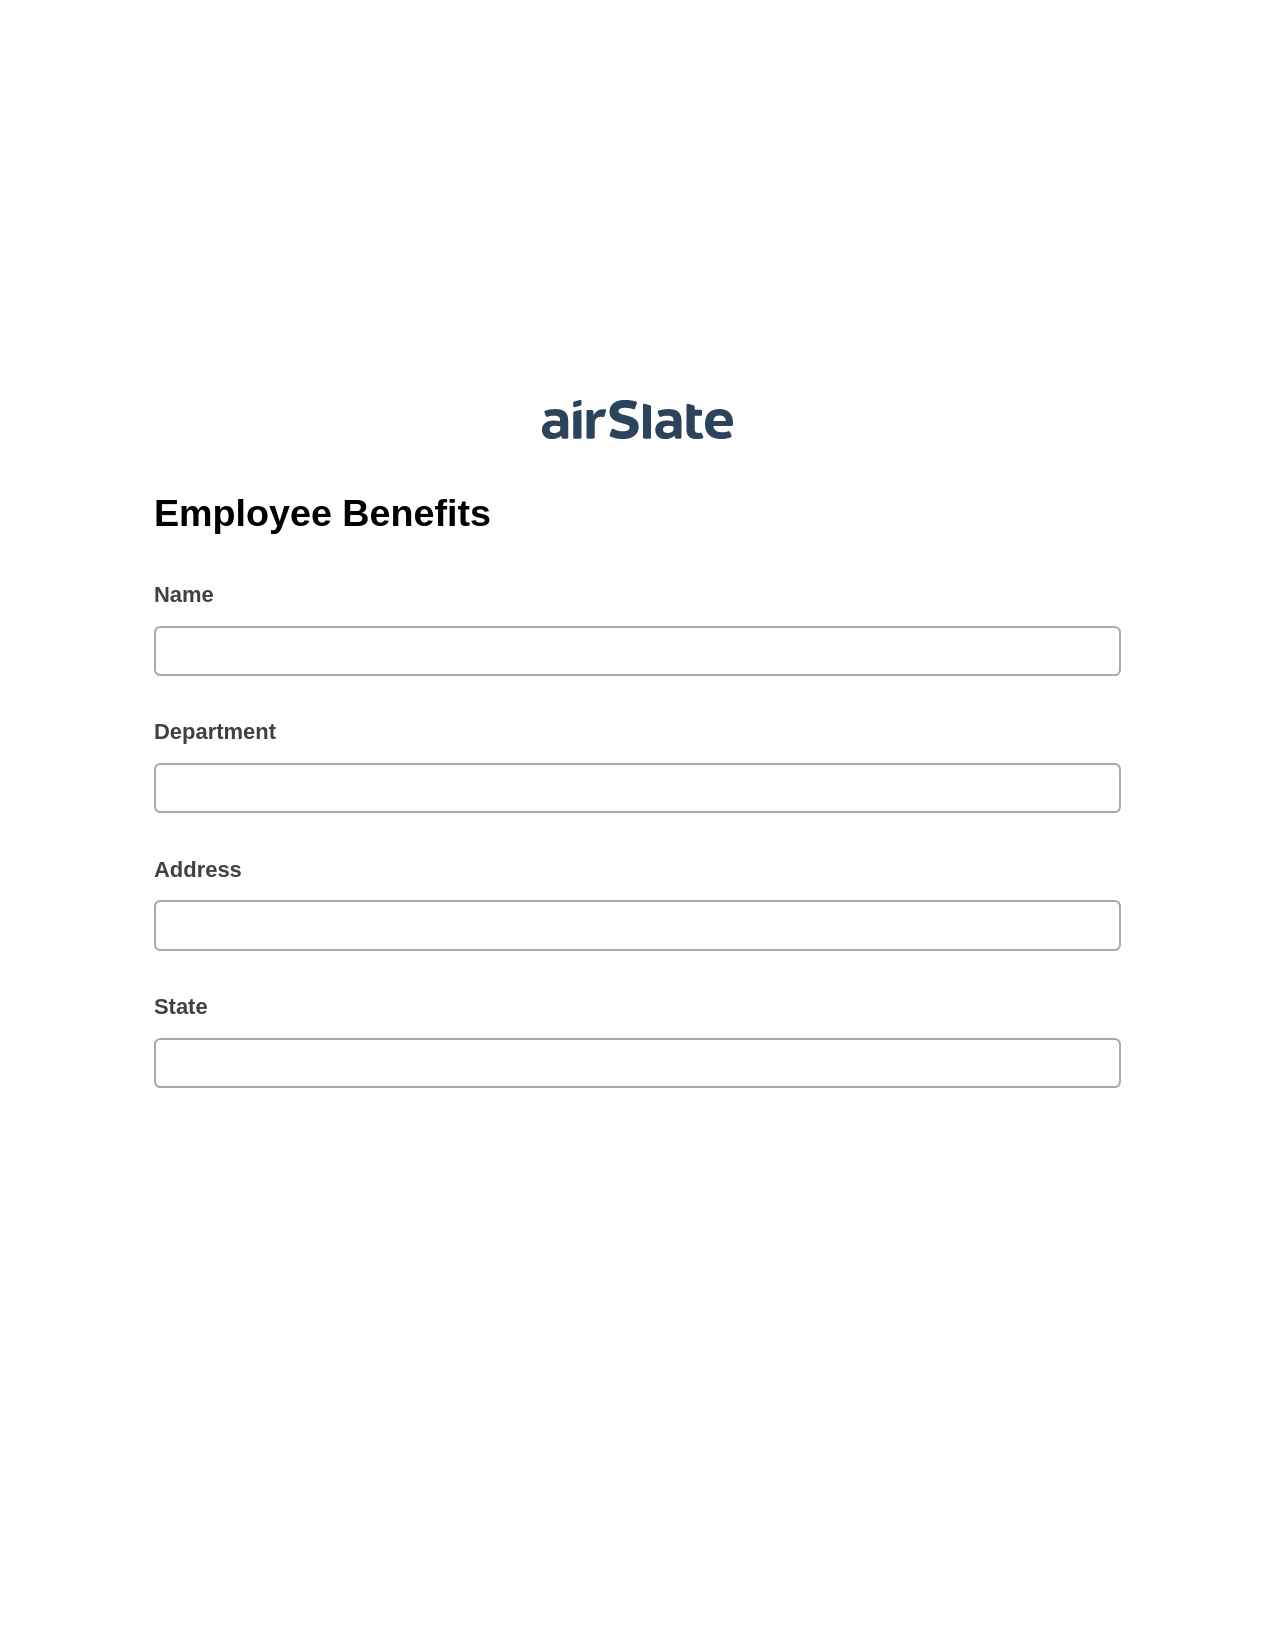 Employee Benefits Pre-fill from CSV File Bot, Remove Tags From Slate Bot, Export to MySQL Bot